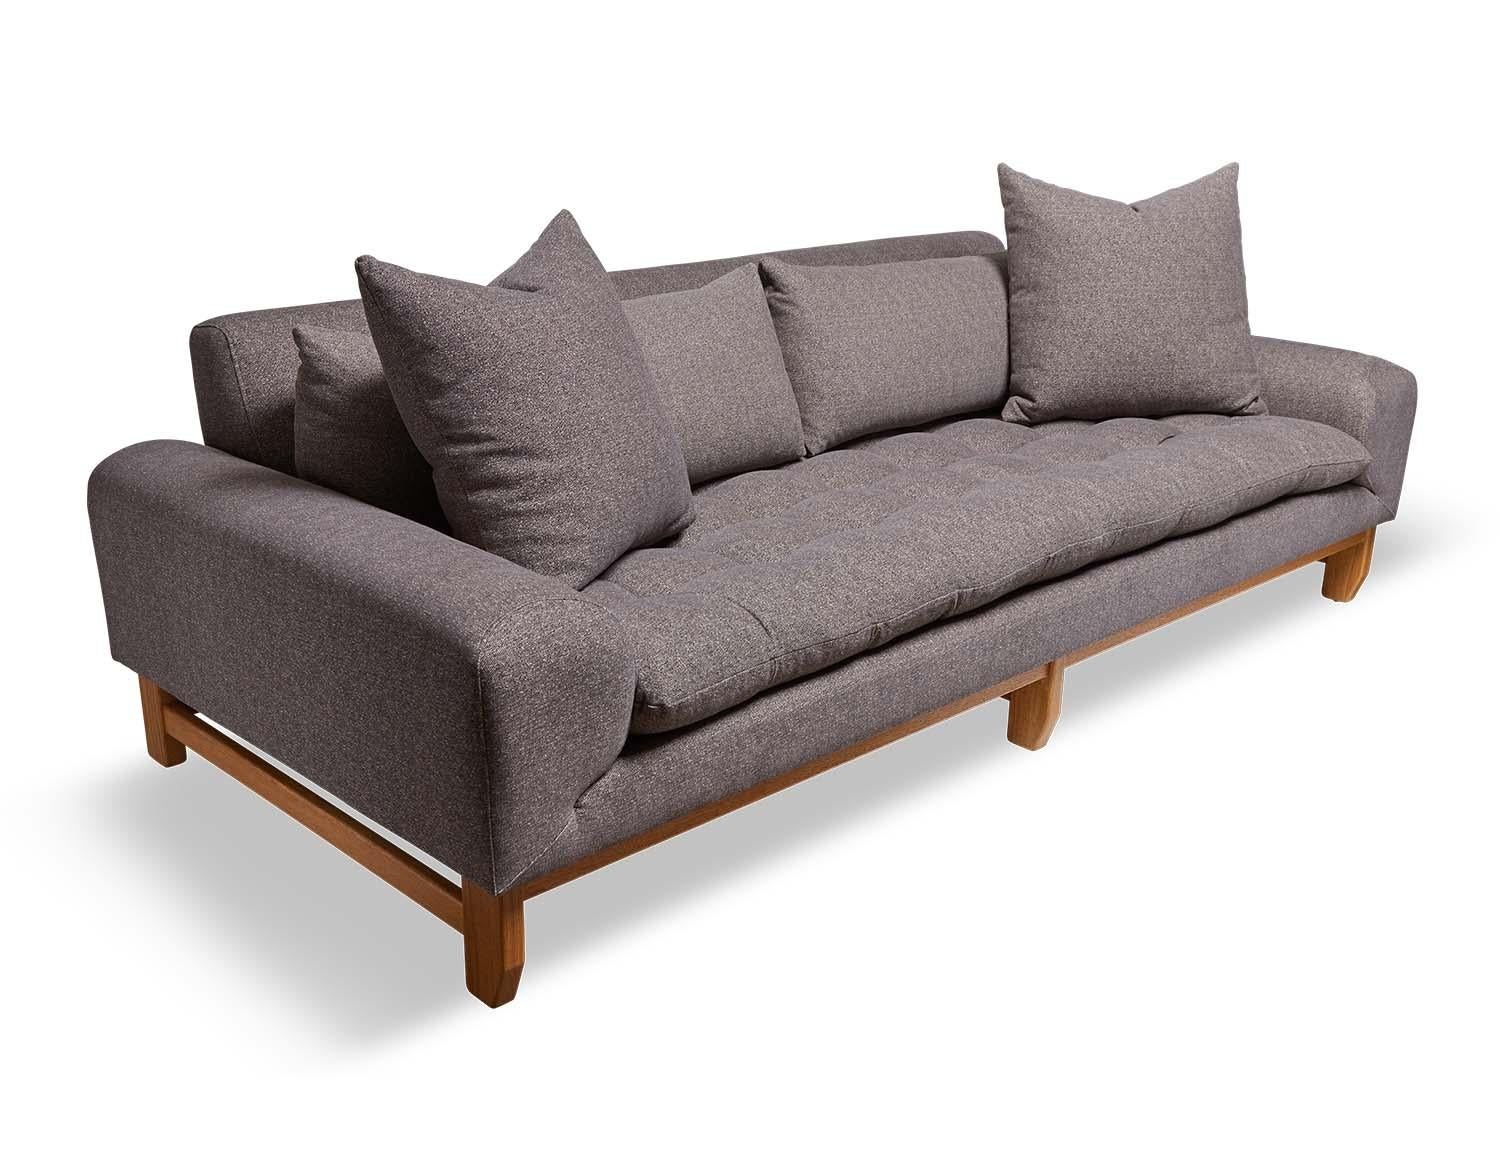 The Morro sofa is our deepest and largest scaled sofa featuring a biscuit tufted seat, loose back cushions and a geometrically sculpted base. Available in American walnut or white oak.

The Lawson-Fenning Collection is designed and handmade in Los